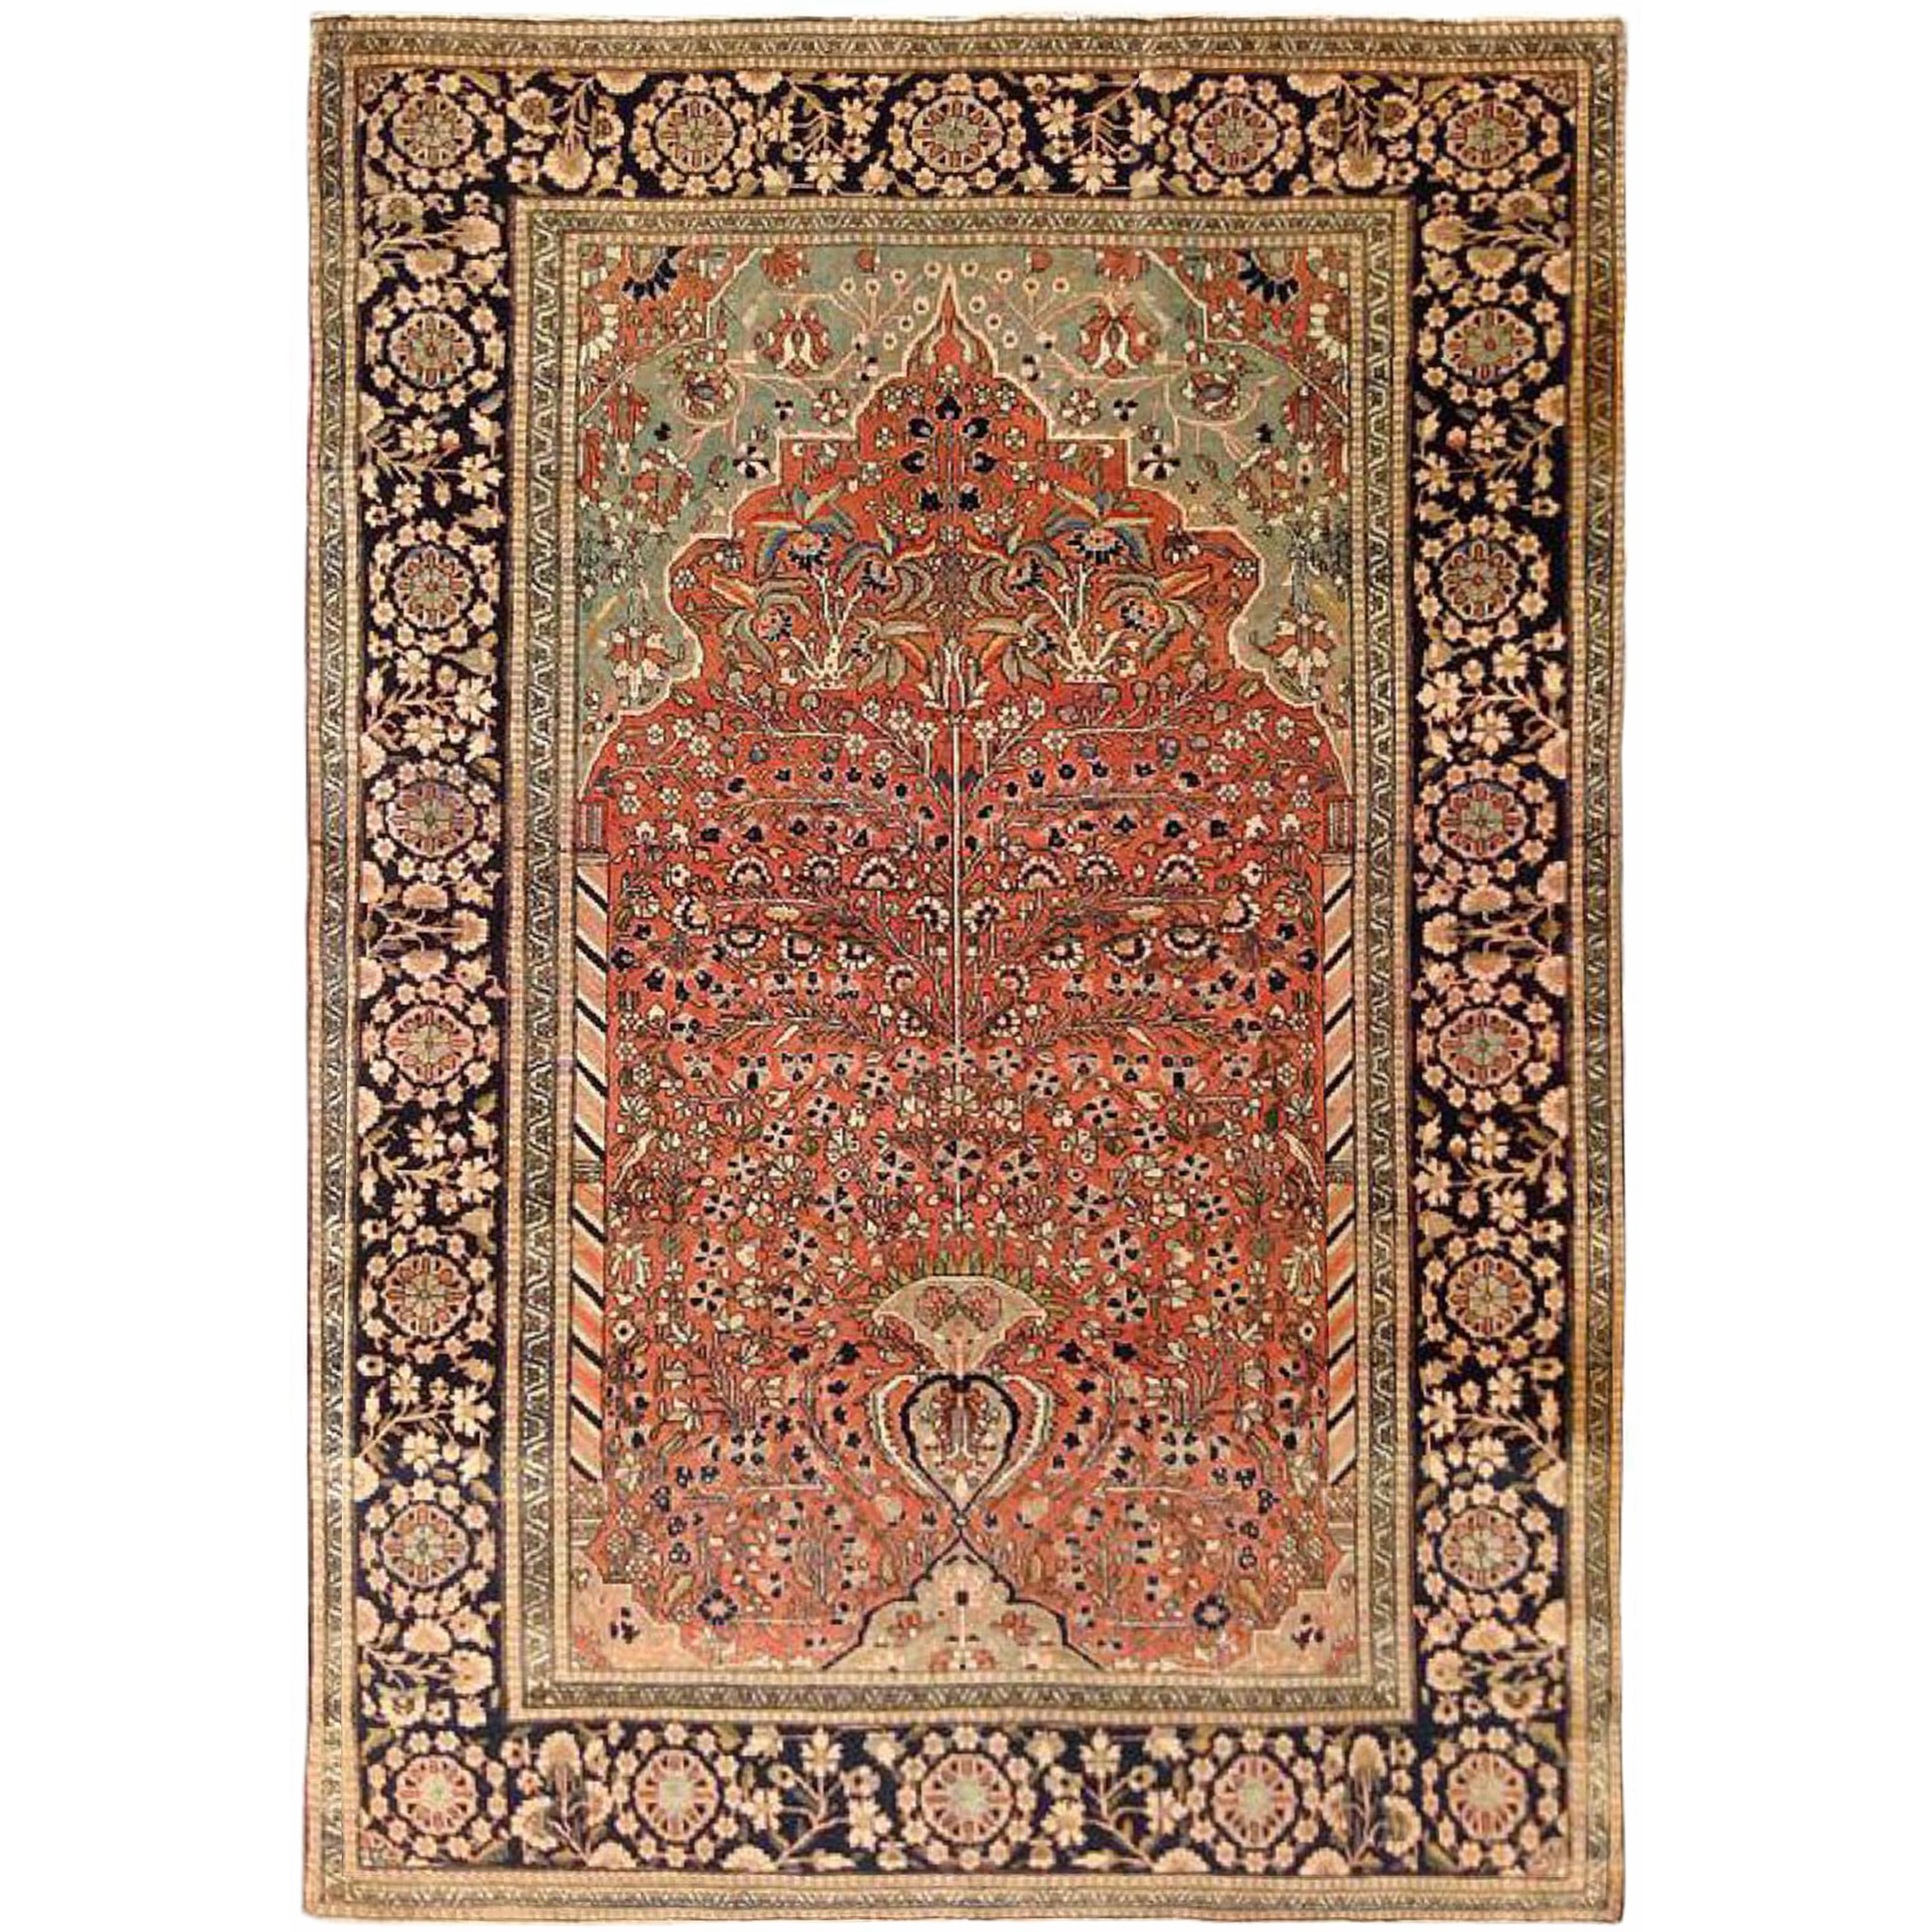 Antique Persian Mohtesham Kashan Rug, Small Size with Lantern Design, circa 1890 For Sale